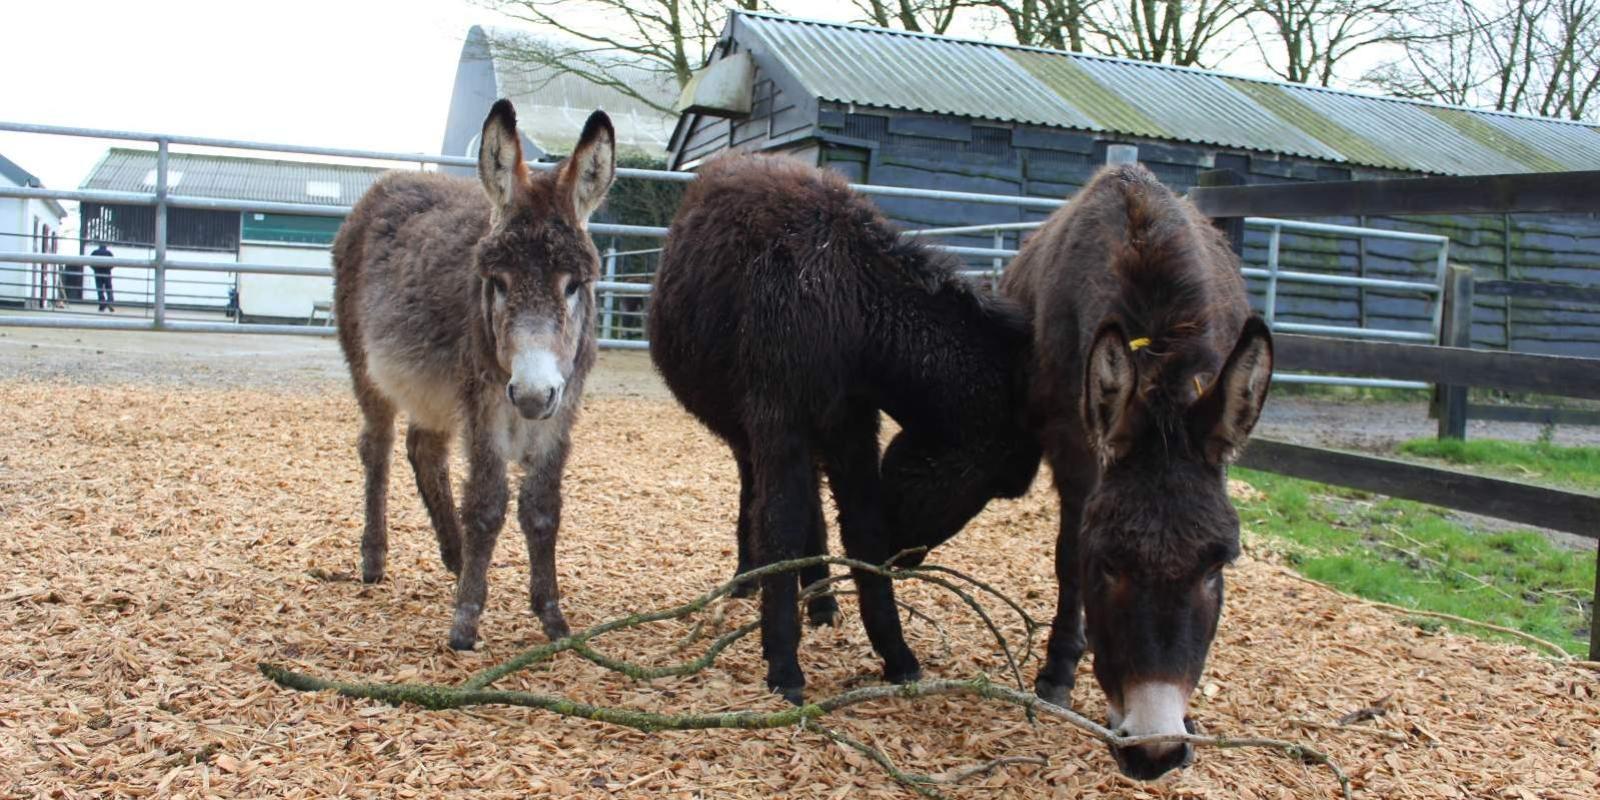 Donkeys chewing a branch